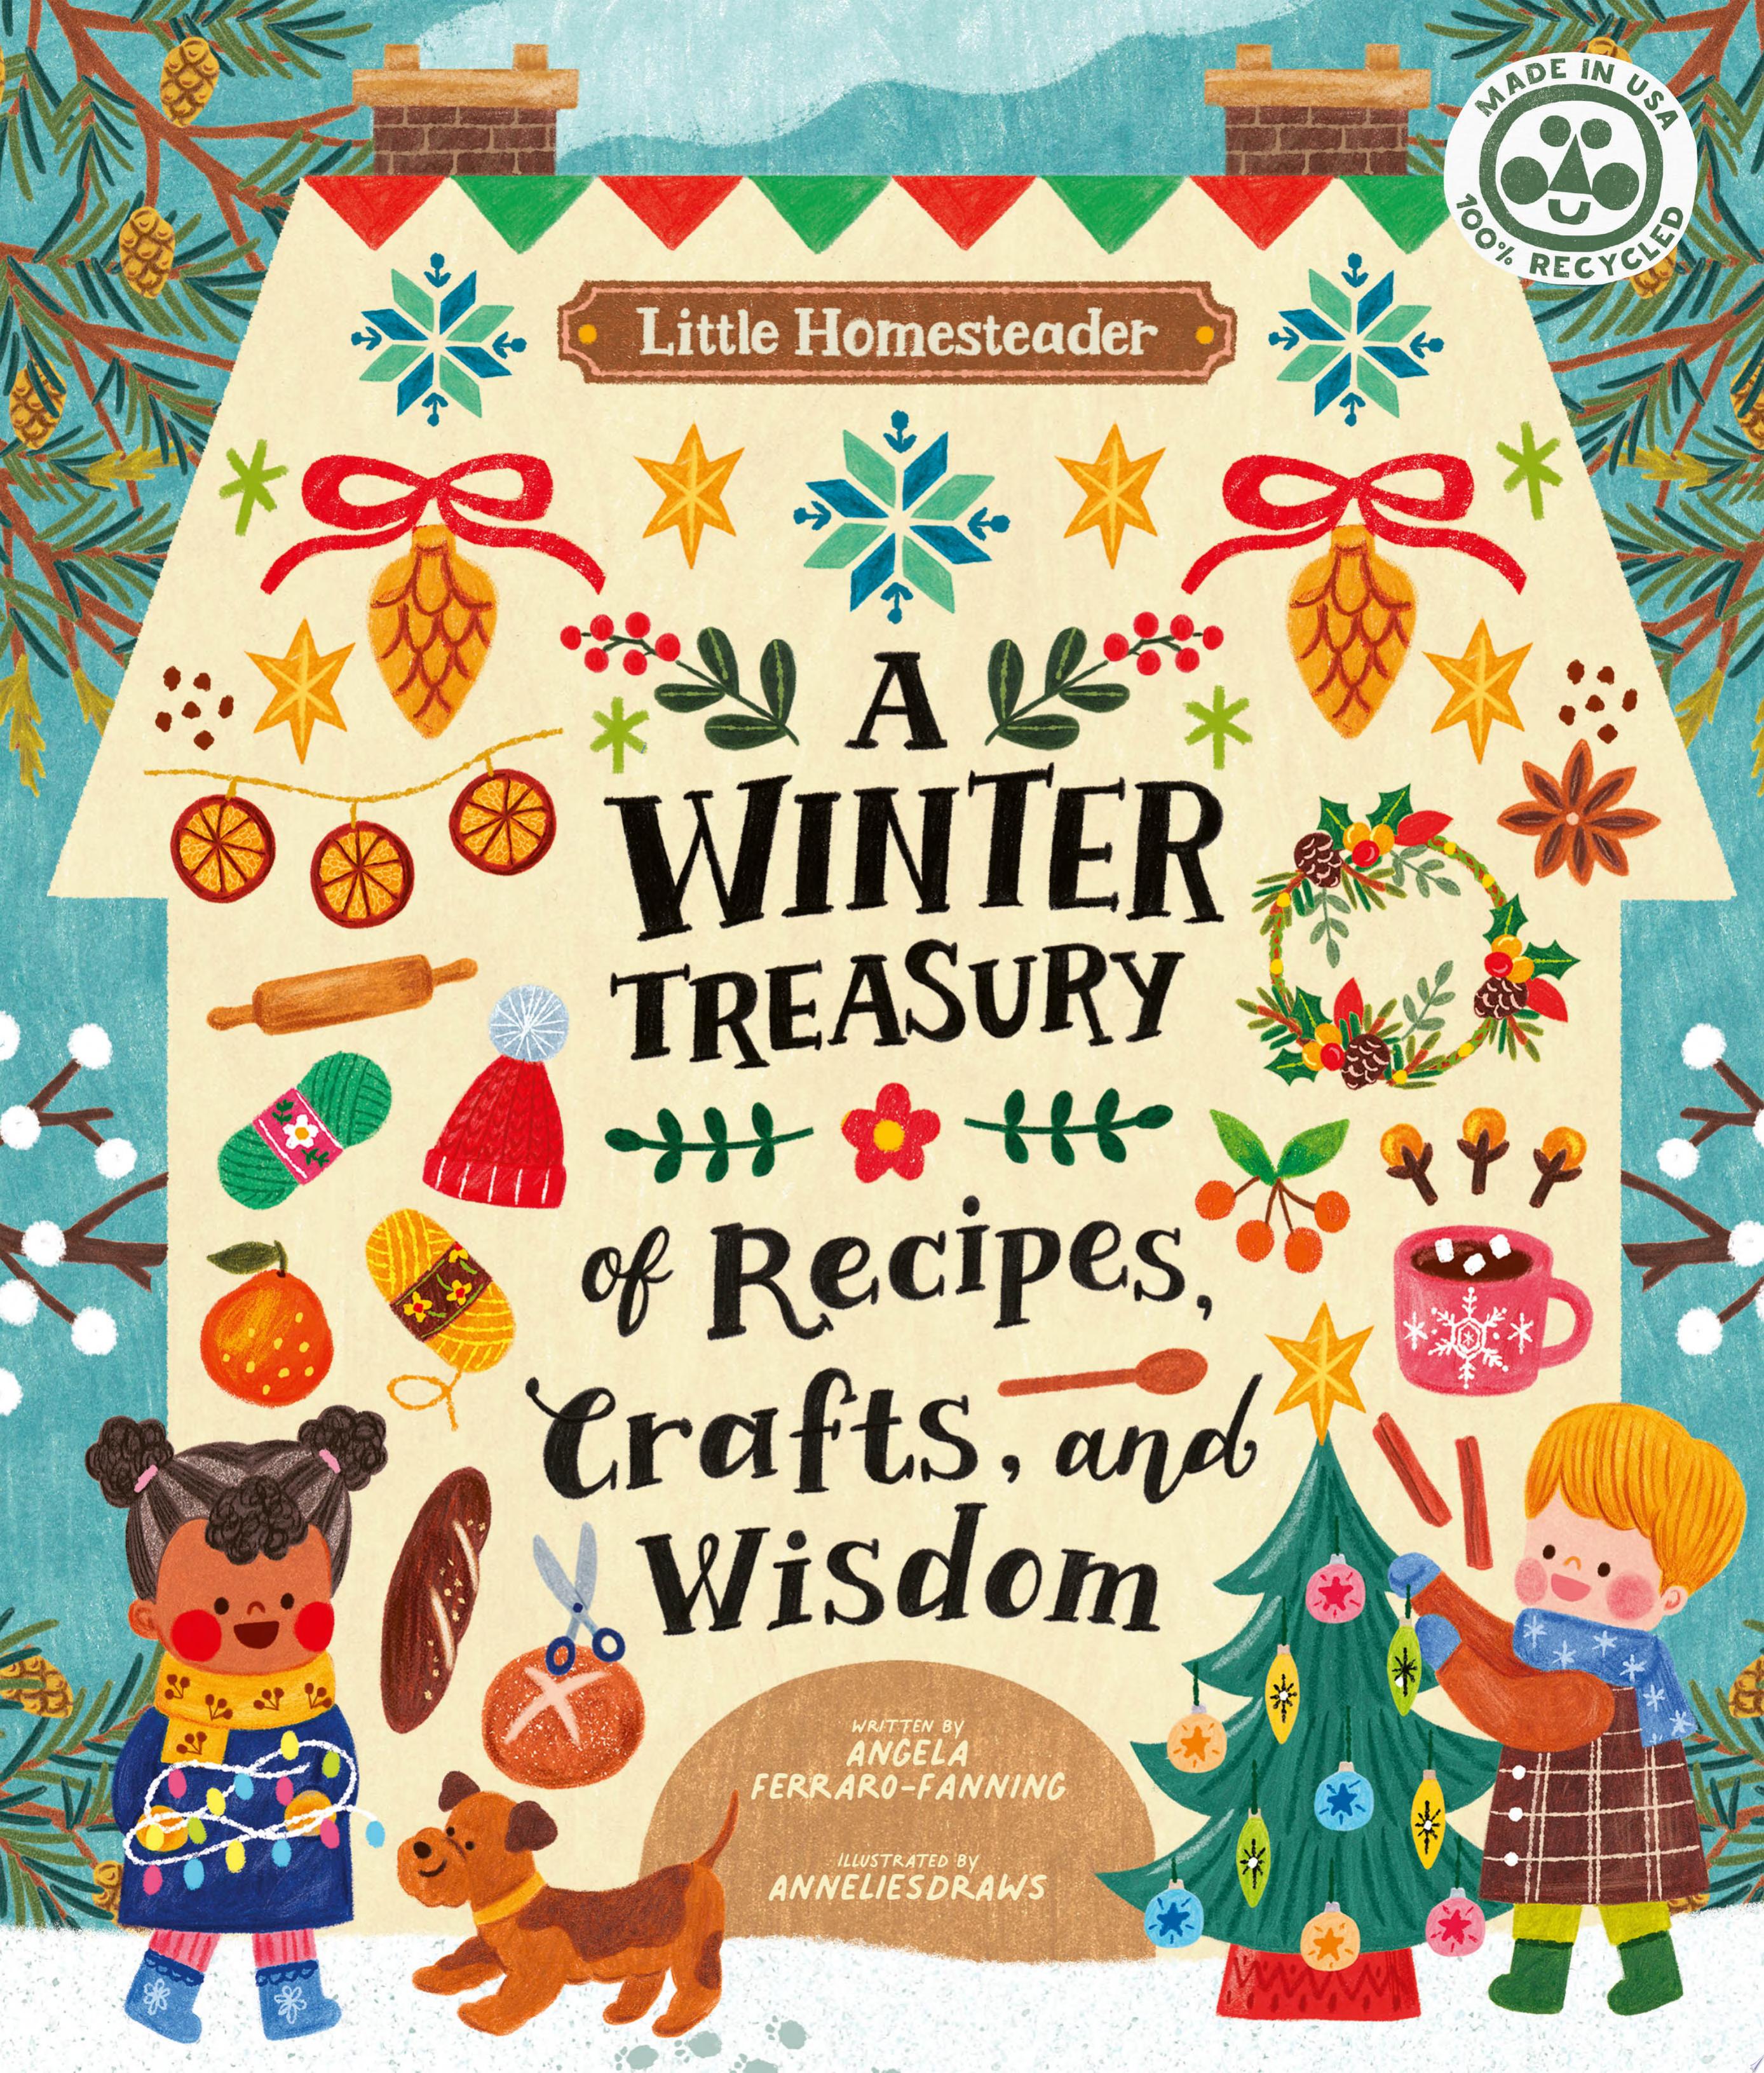 Image for "Little Homesteader: A Winter Treasury of Recipes, Crafts, and Wisdom"